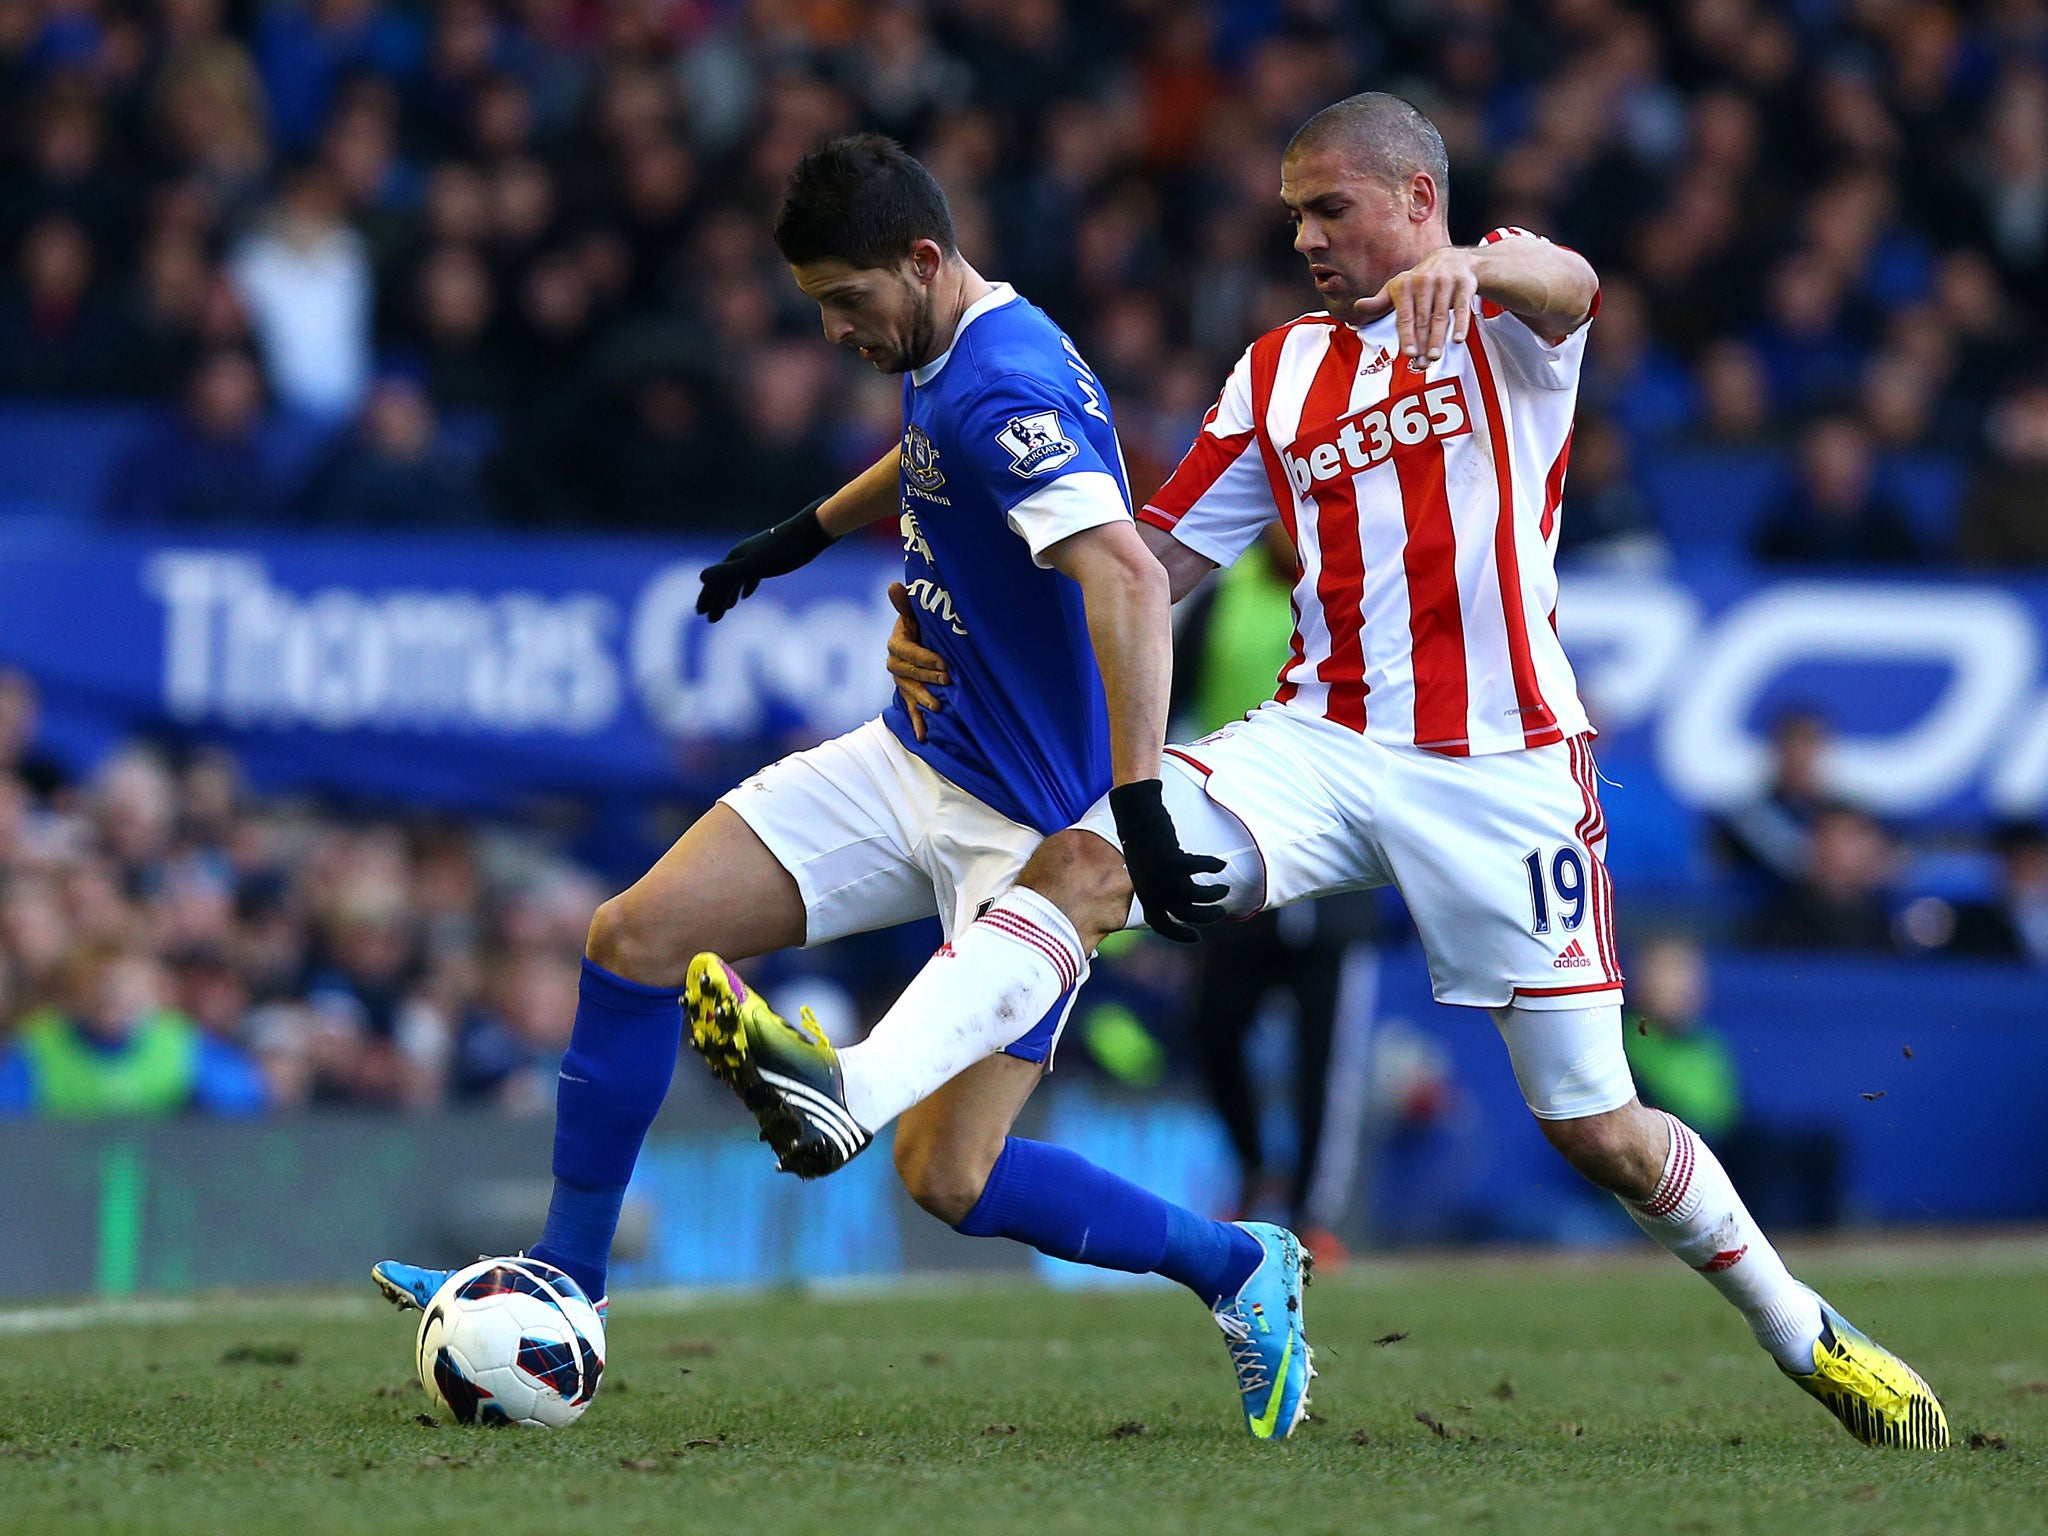 Kevin Mirallas of Everton battles with Jonathan Walters of Stoke City